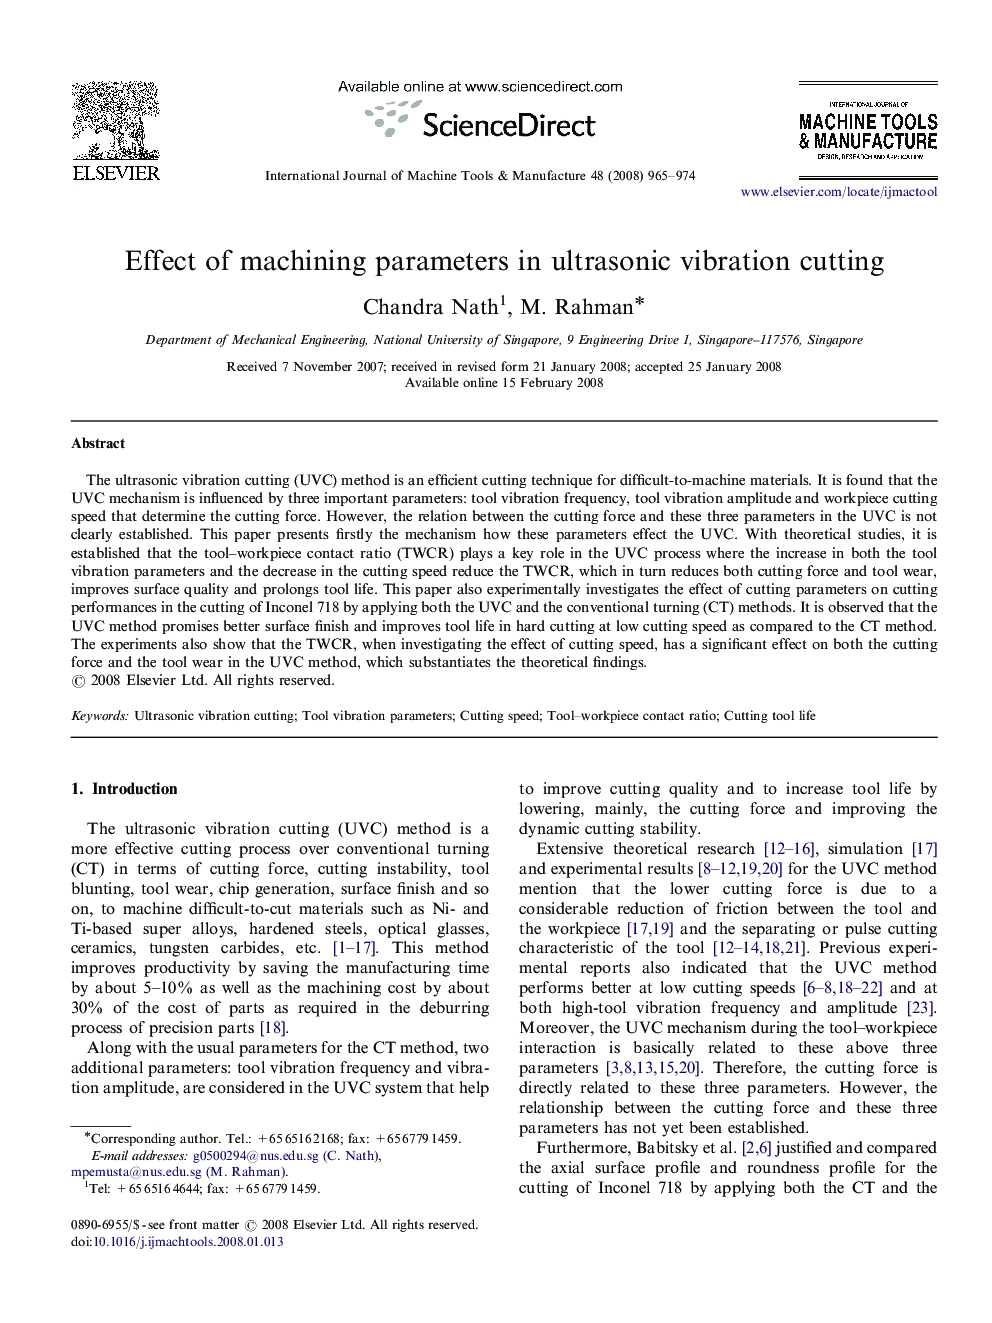 Effect of machining parameters in ultrasonic vibration cutting